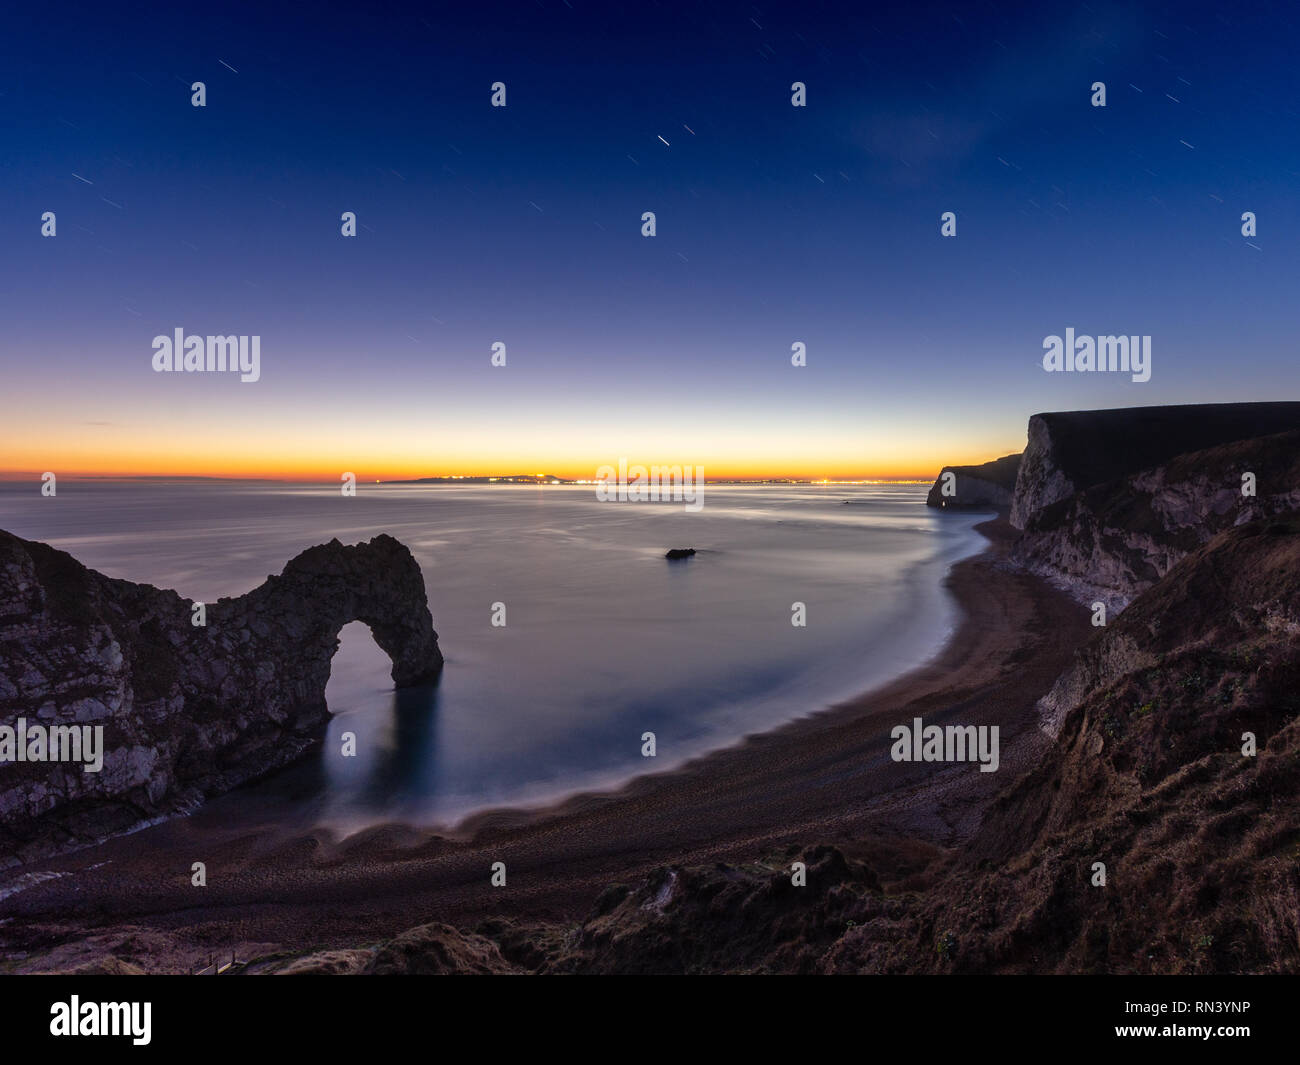 Stars become visible in the night sky above the final afterglow of sunset at Durdle Door and Bat's Head on Dorset's Jurassic Coast. Stock Photo